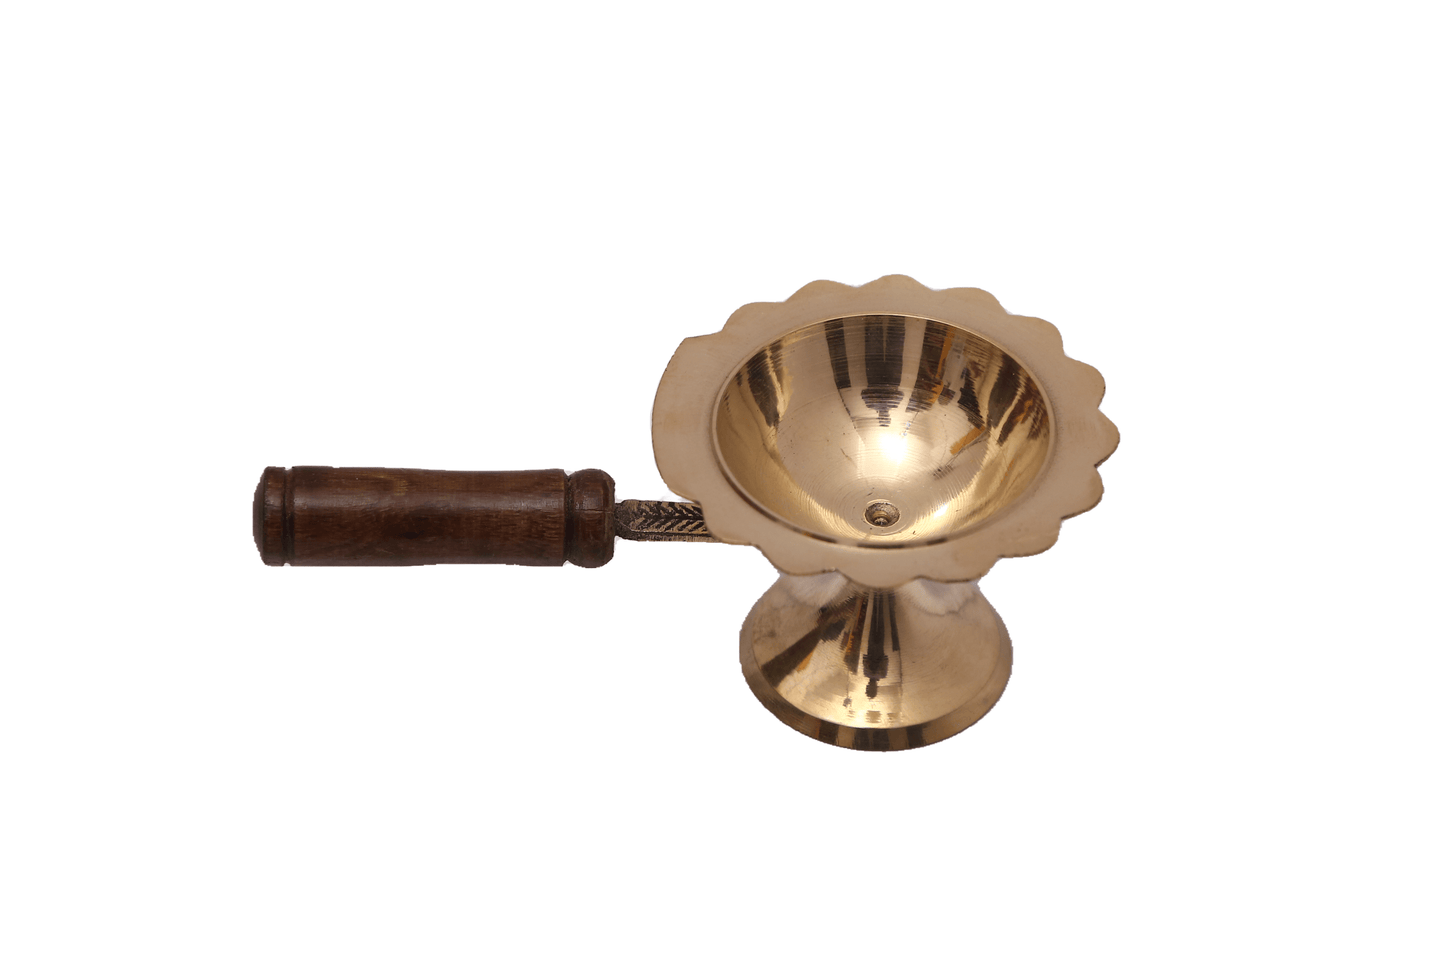 Brass Dhoop Diya / Aarti Kapoor Holder with Wooden Handle (6 Inches)